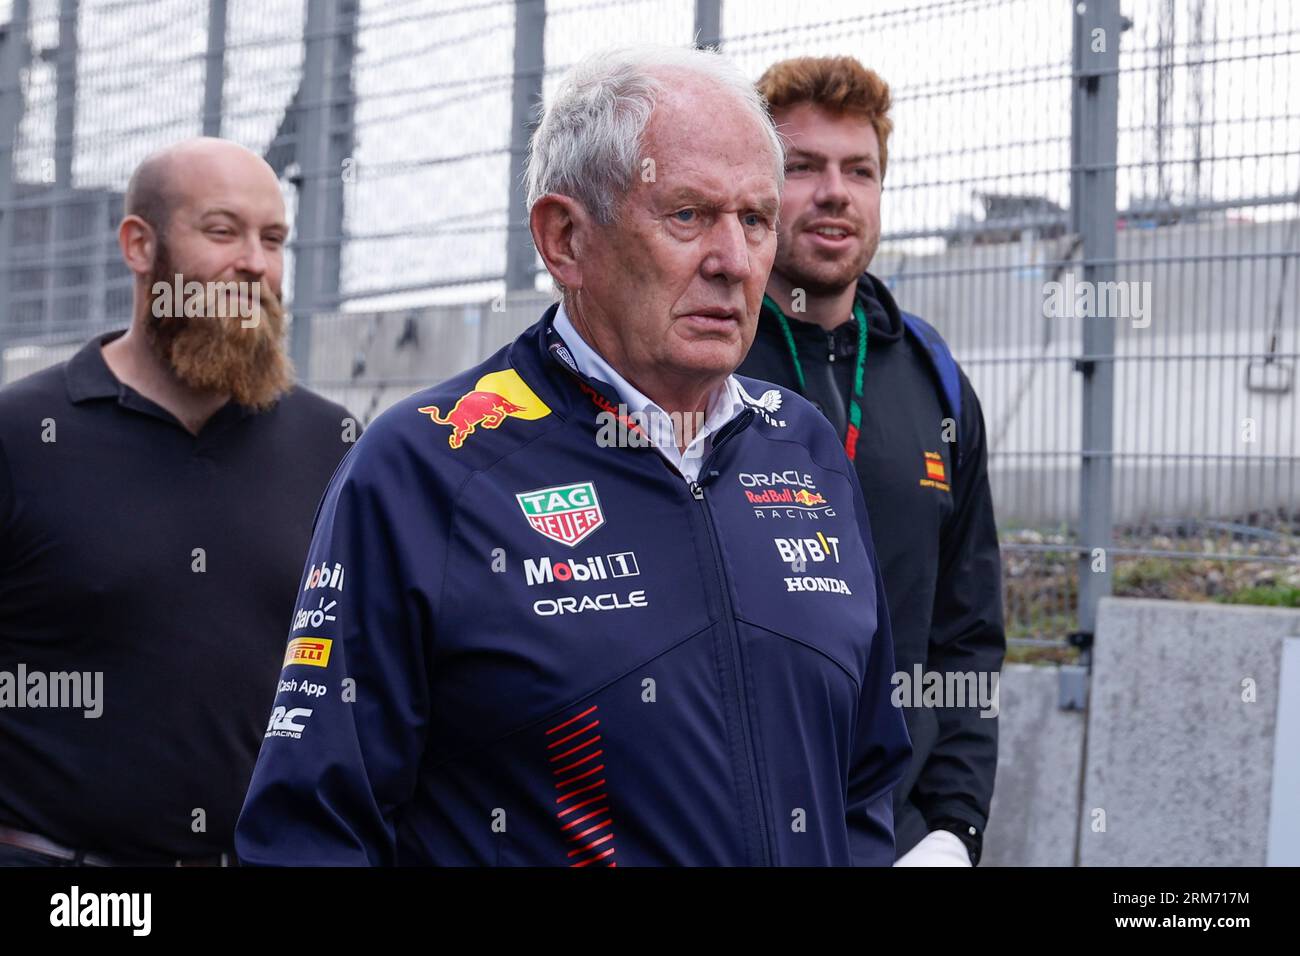 ZANDVOORT, NETHERLANDS - AUGUST 26: Helmut Marko of Oracle Red Bull Racing looks on during the Dutch GP Formula 1  and  at Circuit Zandvoort on August Stock Photo